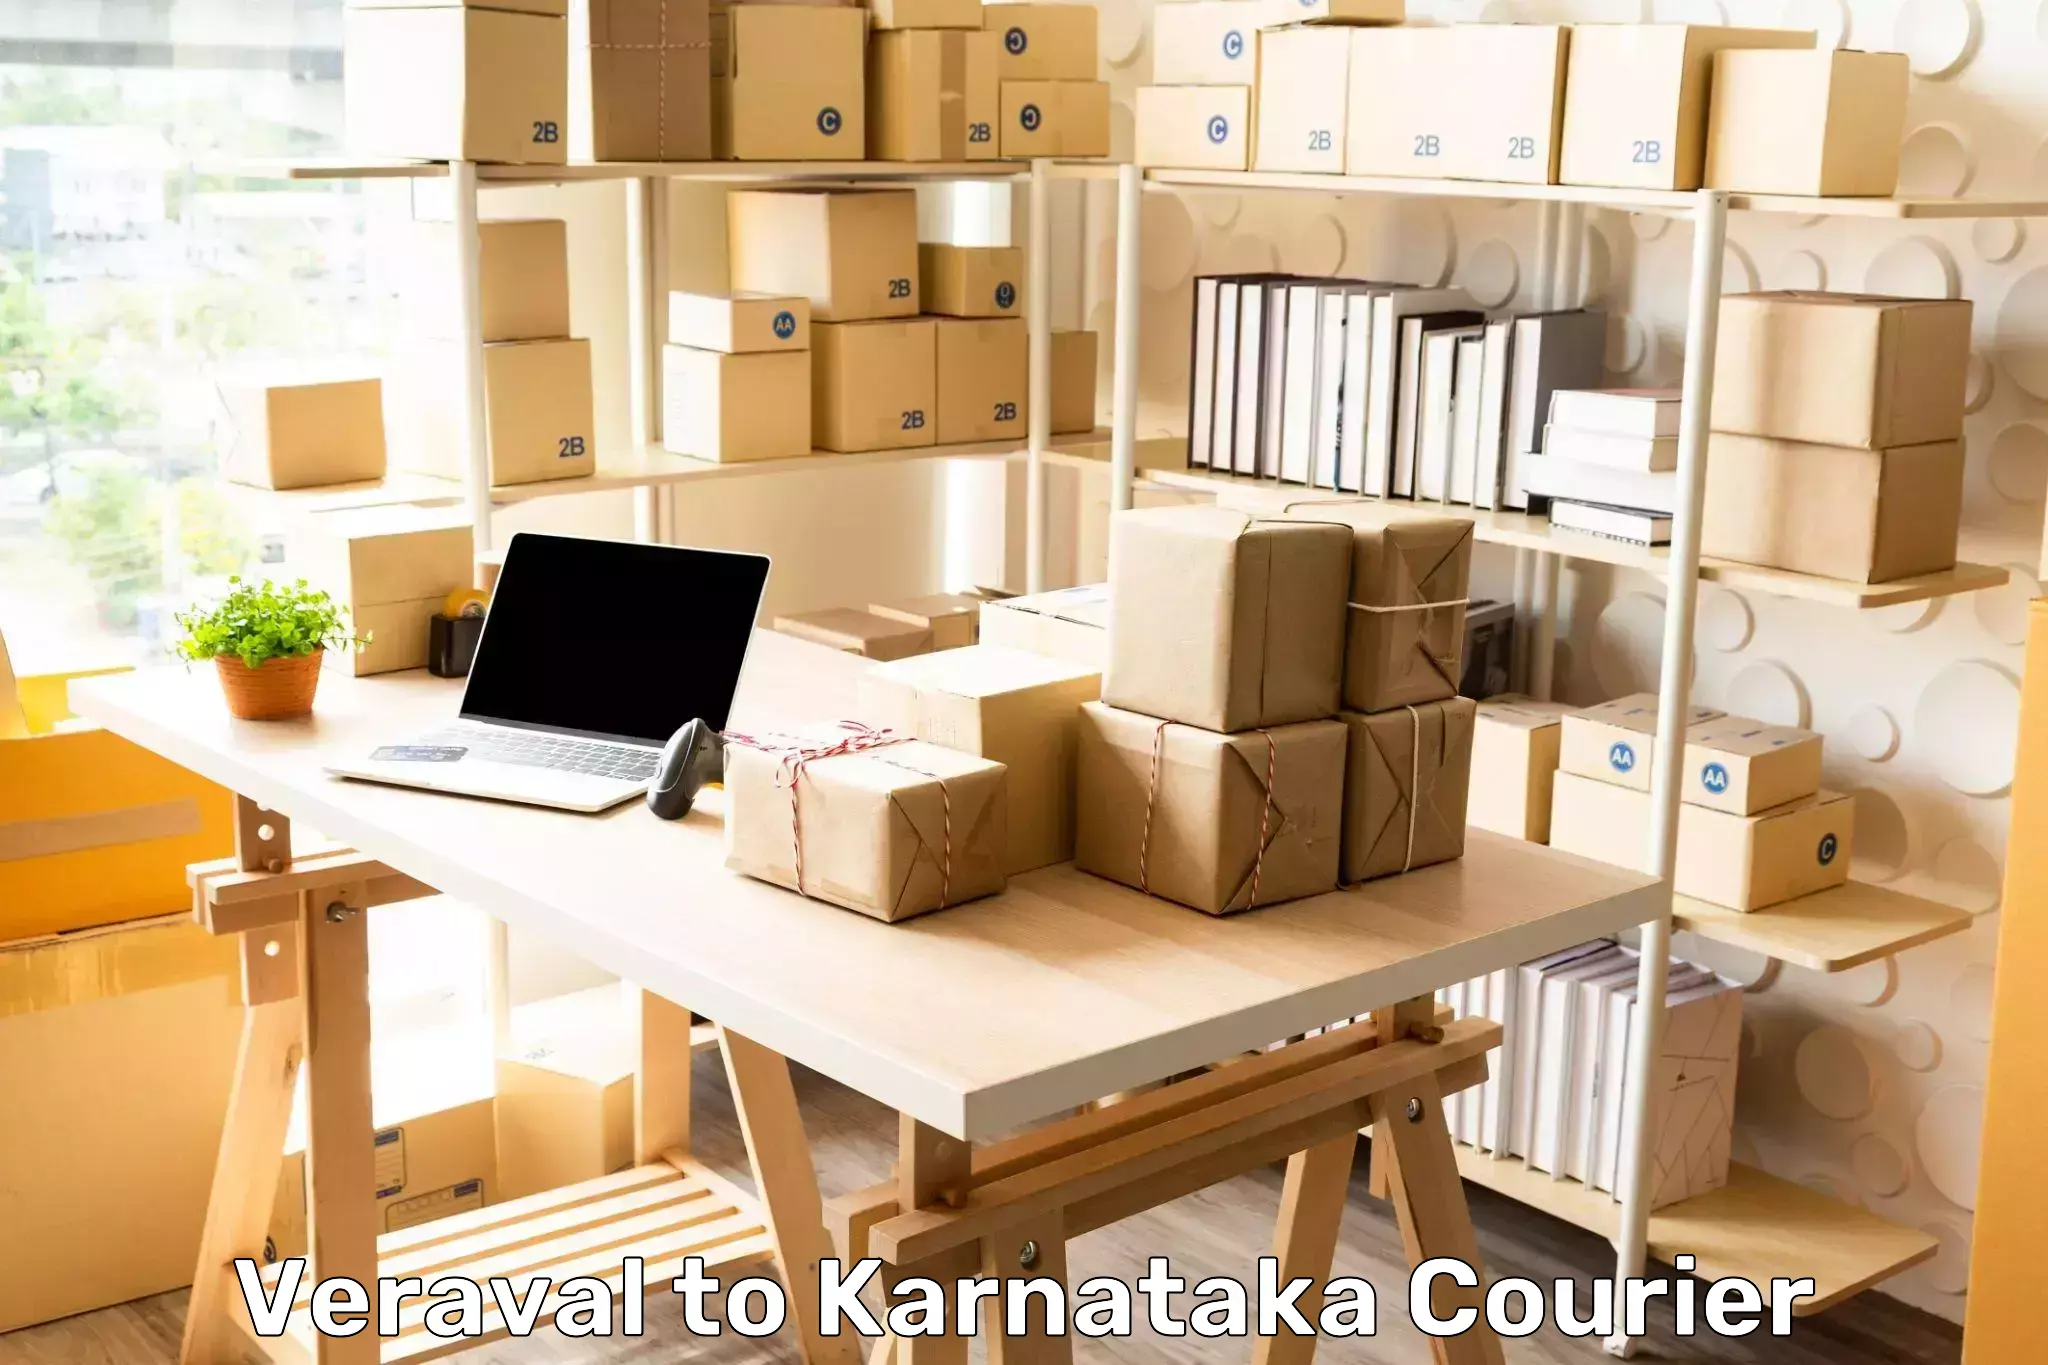 Budget-friendly shipping Veraval to Bangalore